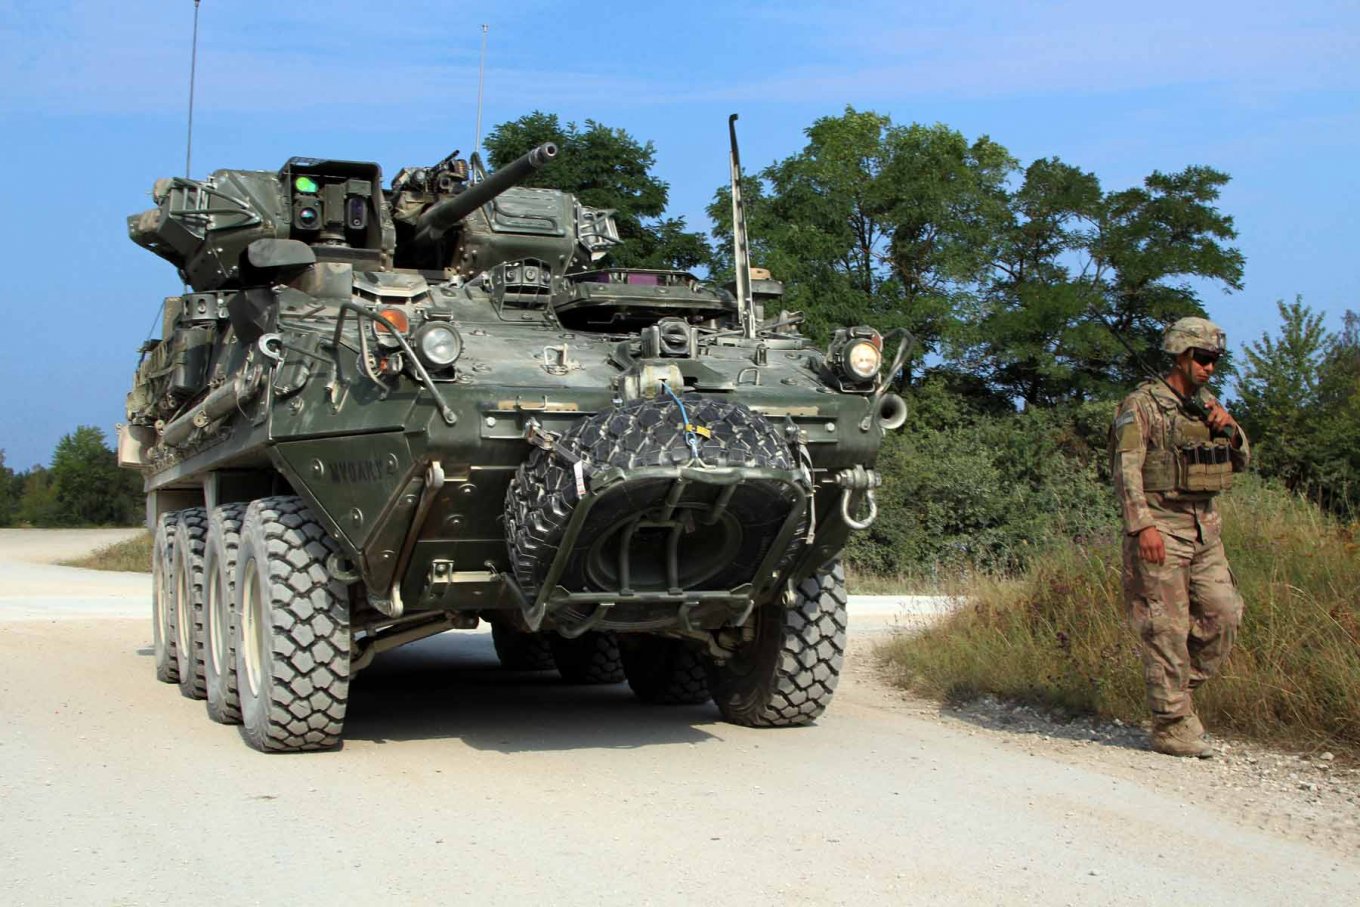 Stryker armored combat vehicle